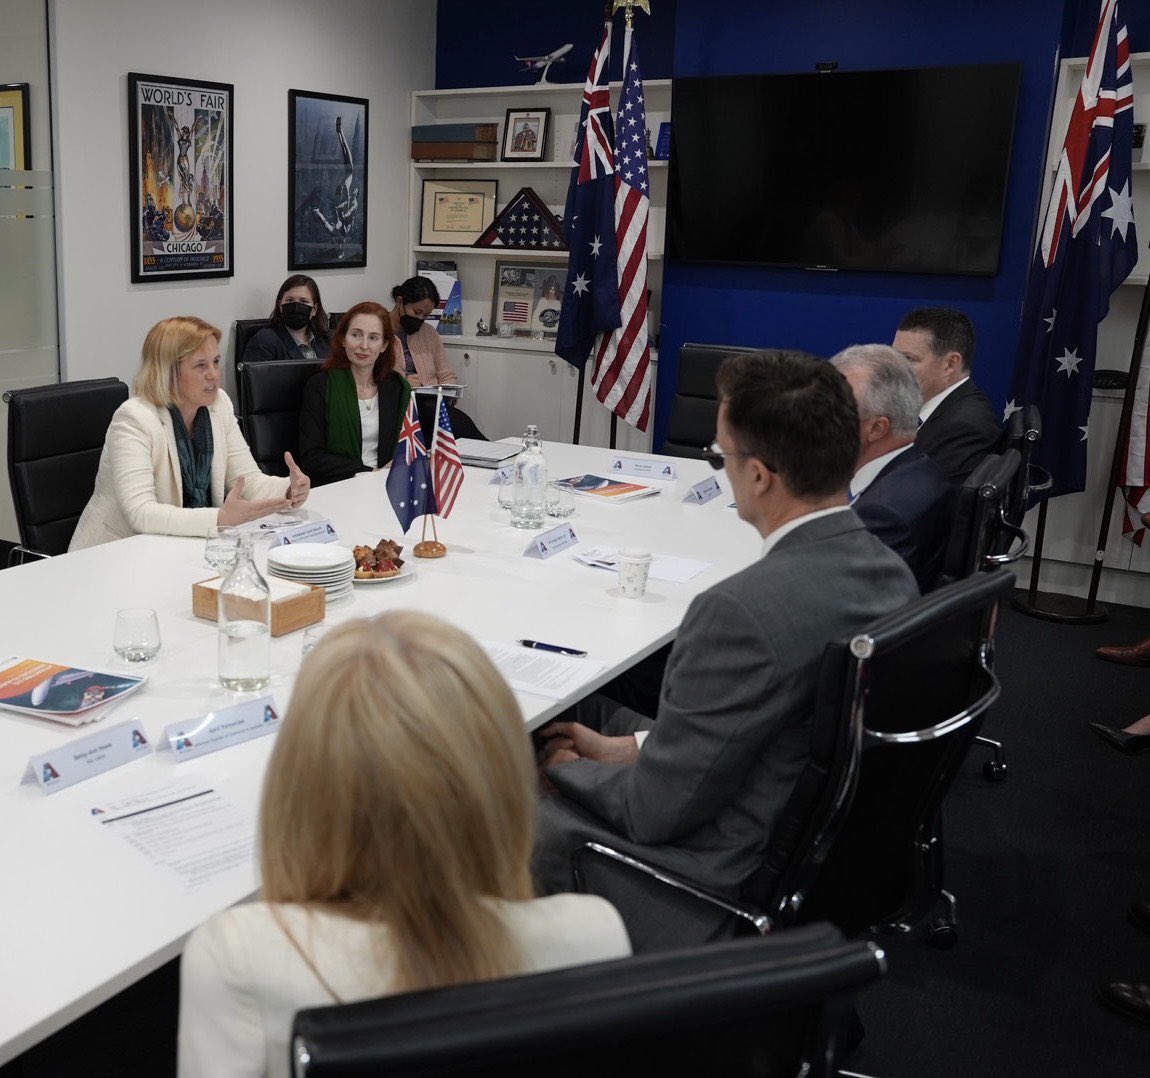 Ambassador Sarah Bianchi has arrived in Sydney, Australia and started her first individual trip as Deputy United States Trade Representative! She just met with AmChamAU and discussed the Biden Administration’s commitment to a strong 🇺🇸-🇦🇺 trade relationship.